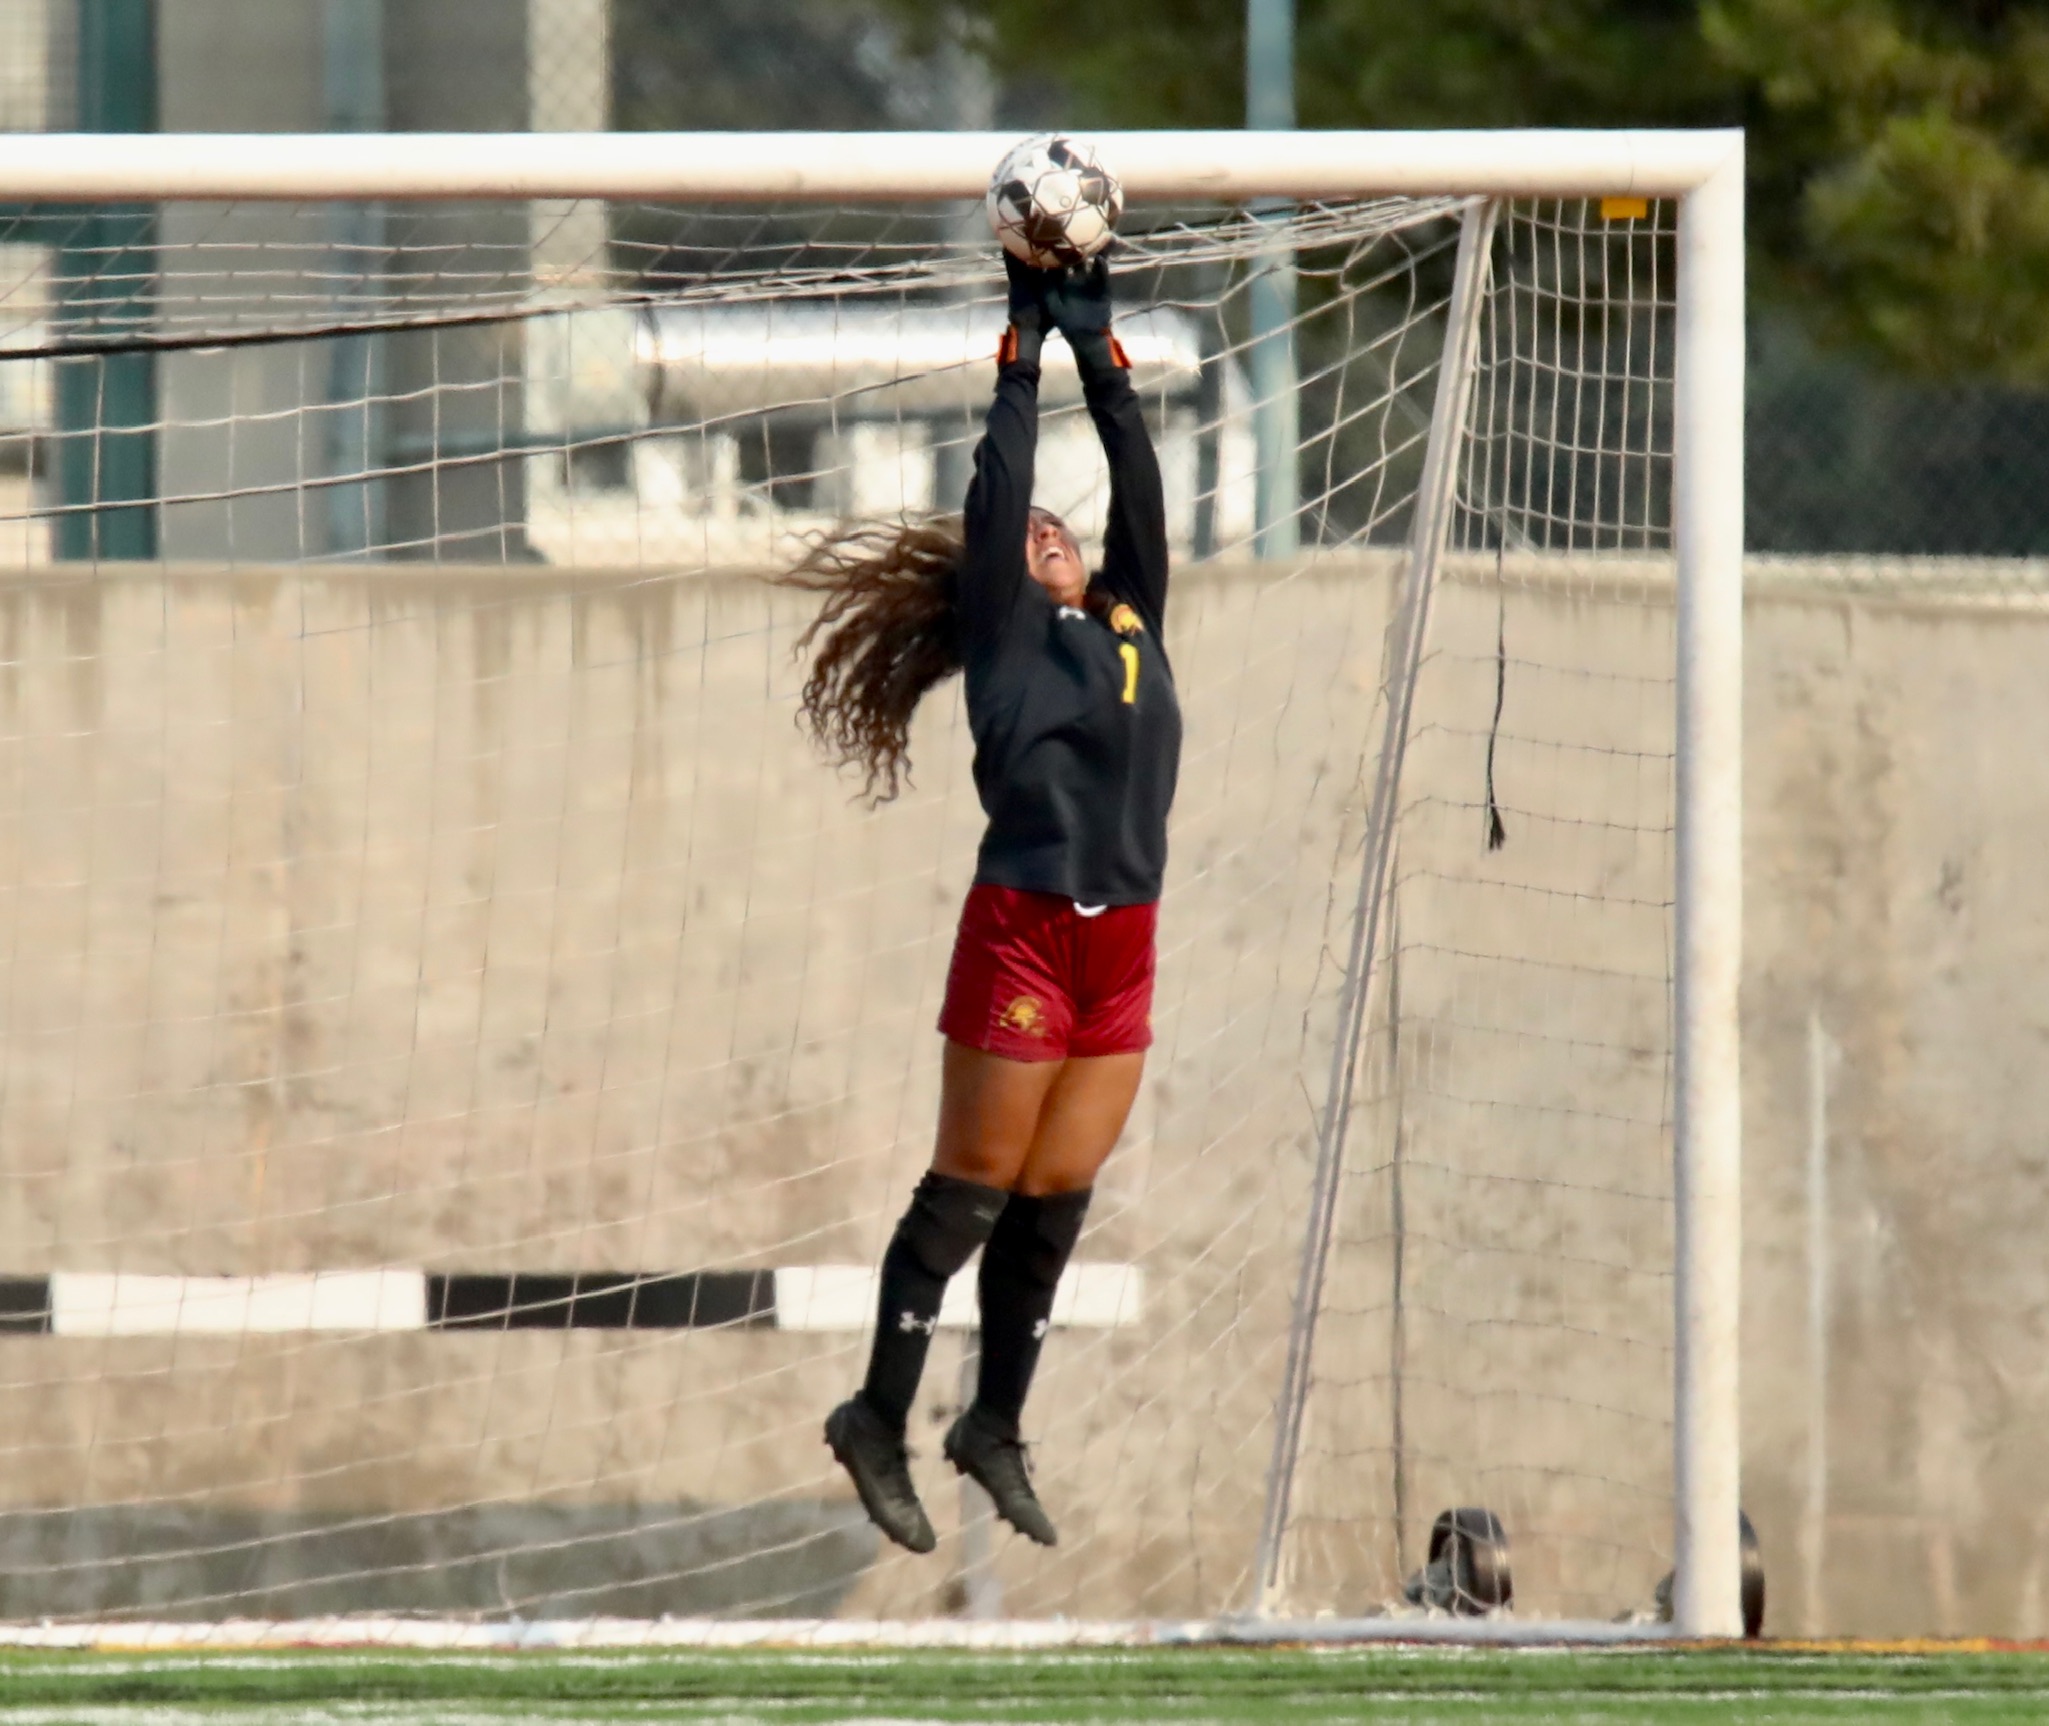 Goalie Stevie Mancillas was busy in PCC women's soccer loss v. Rio Hondo on Tuesday (photo by Michael Watkins).